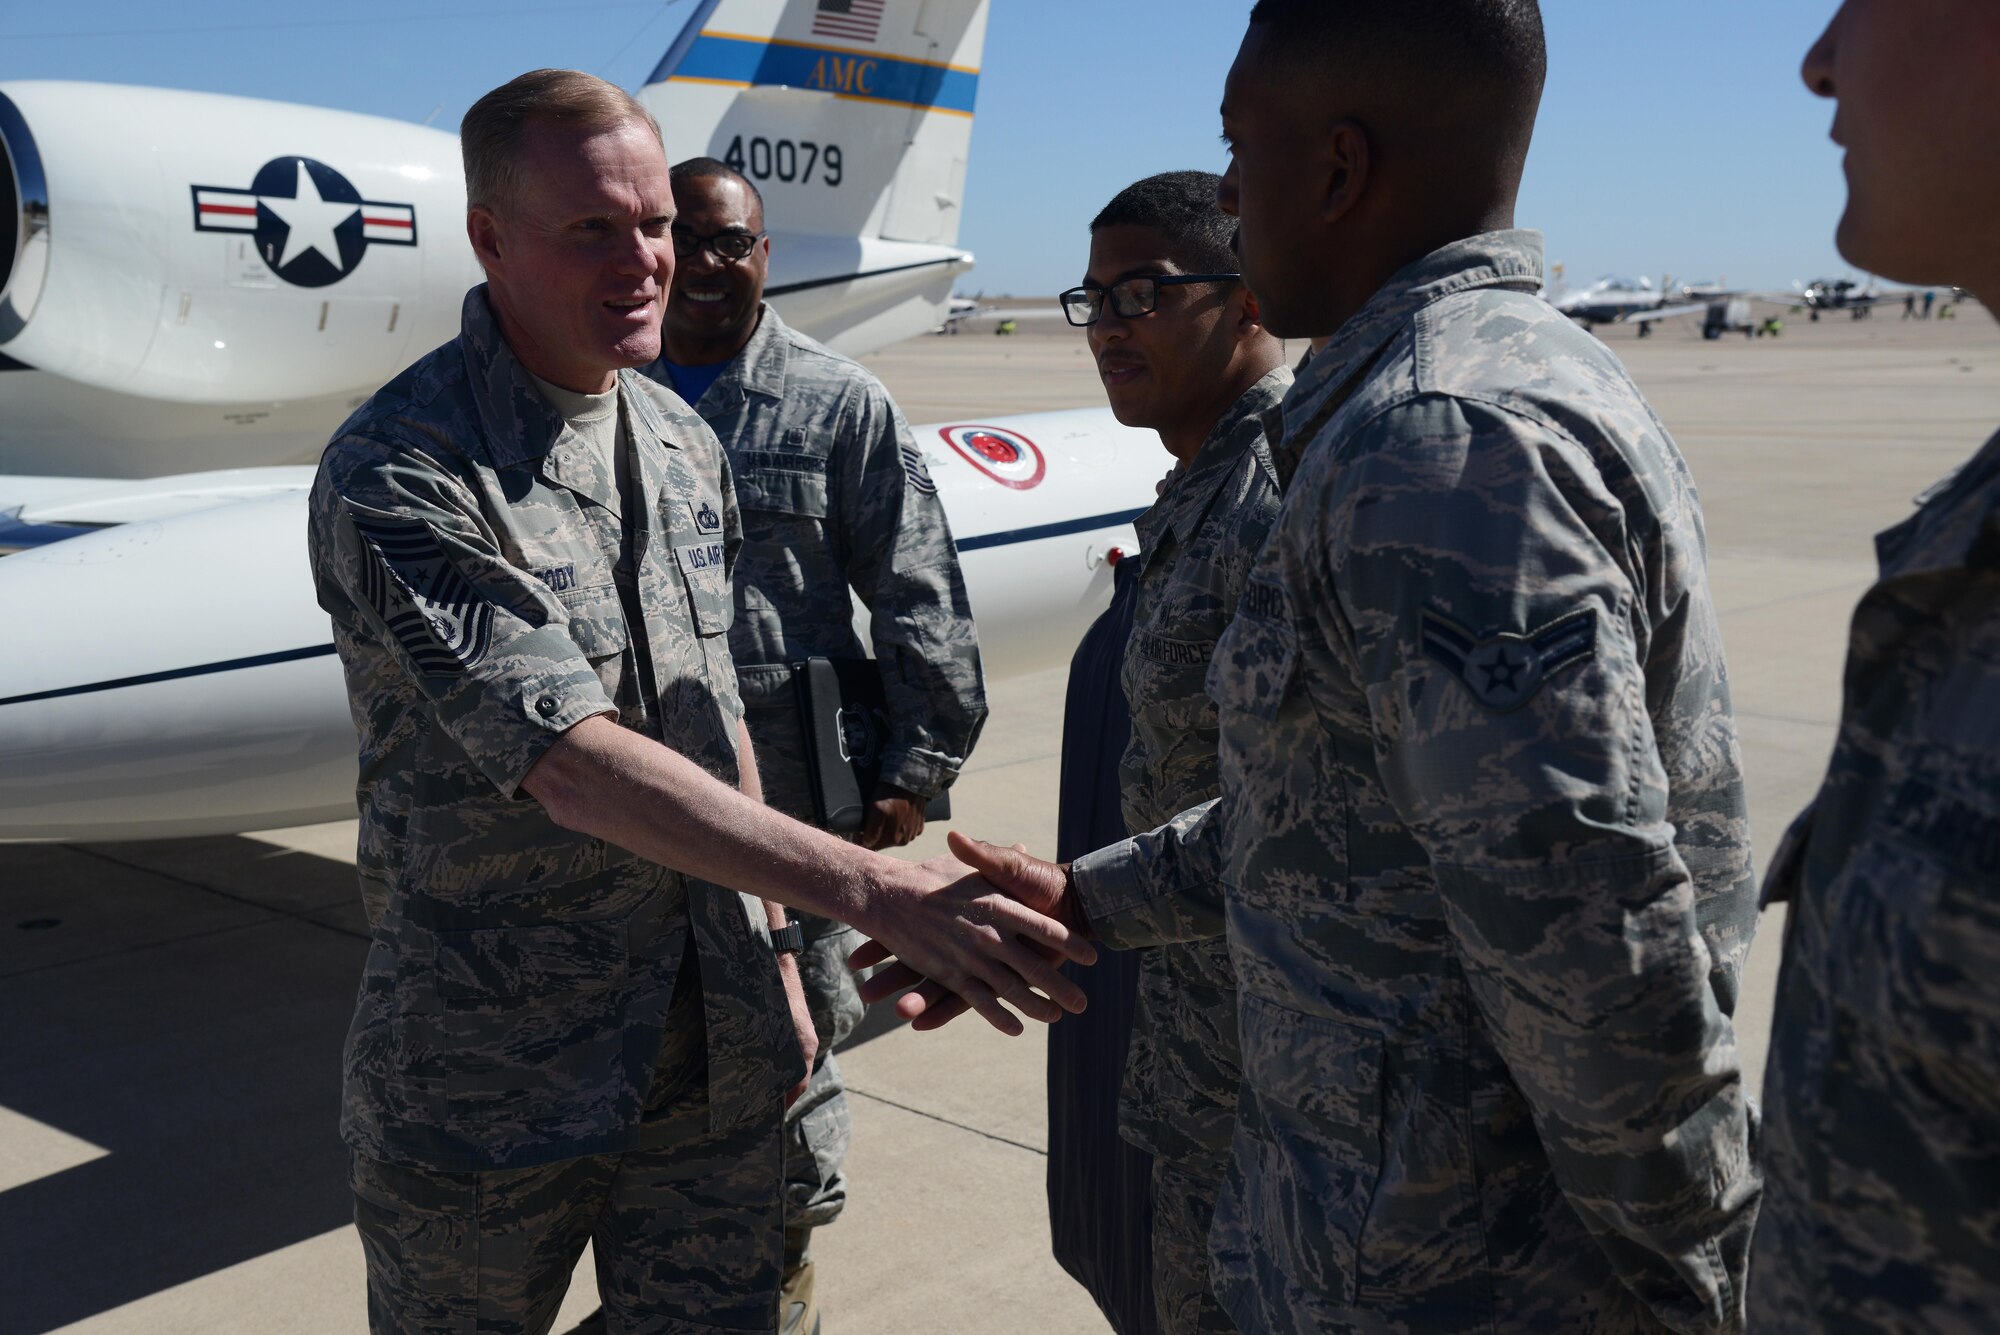 Chief Master Sgt. of the Air Force James Cody is greeted by Airmen from Laughlin Air Force Base, Texas, Feb. 12, 2016. Cody went on to host a Q-and-A session with Airmen and speak at the annual awards banquet. (U.S. Air Force photo by Airman 1st Class Brandon May)